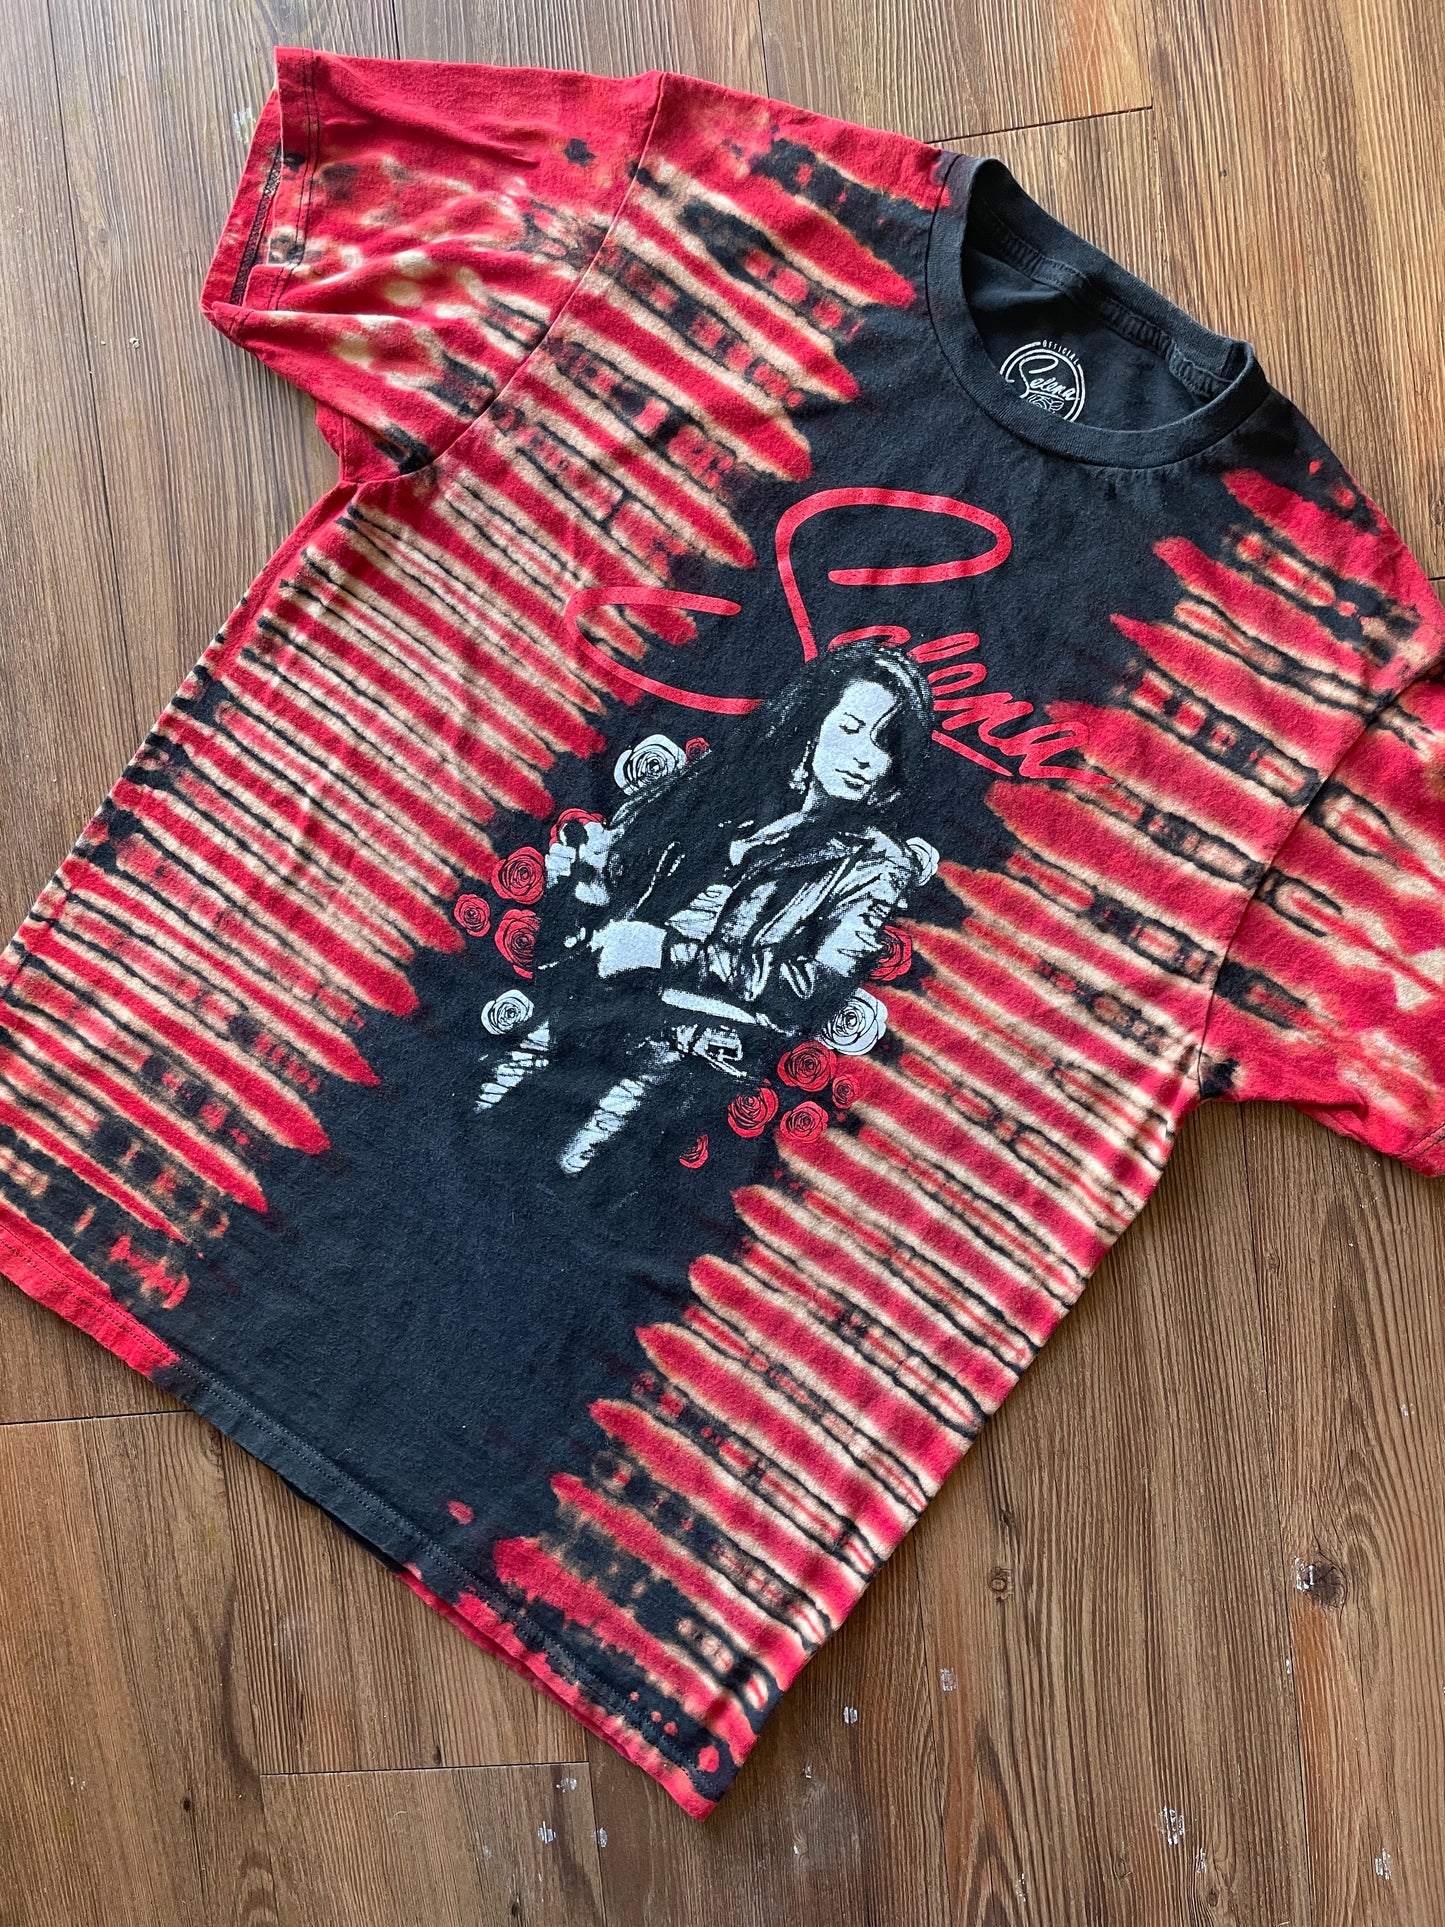 LARGE Men’s Selena Red Roses Handmade Tie Dye T-Shirt | One-Of-a-Kind Black and Red Short Sleeve